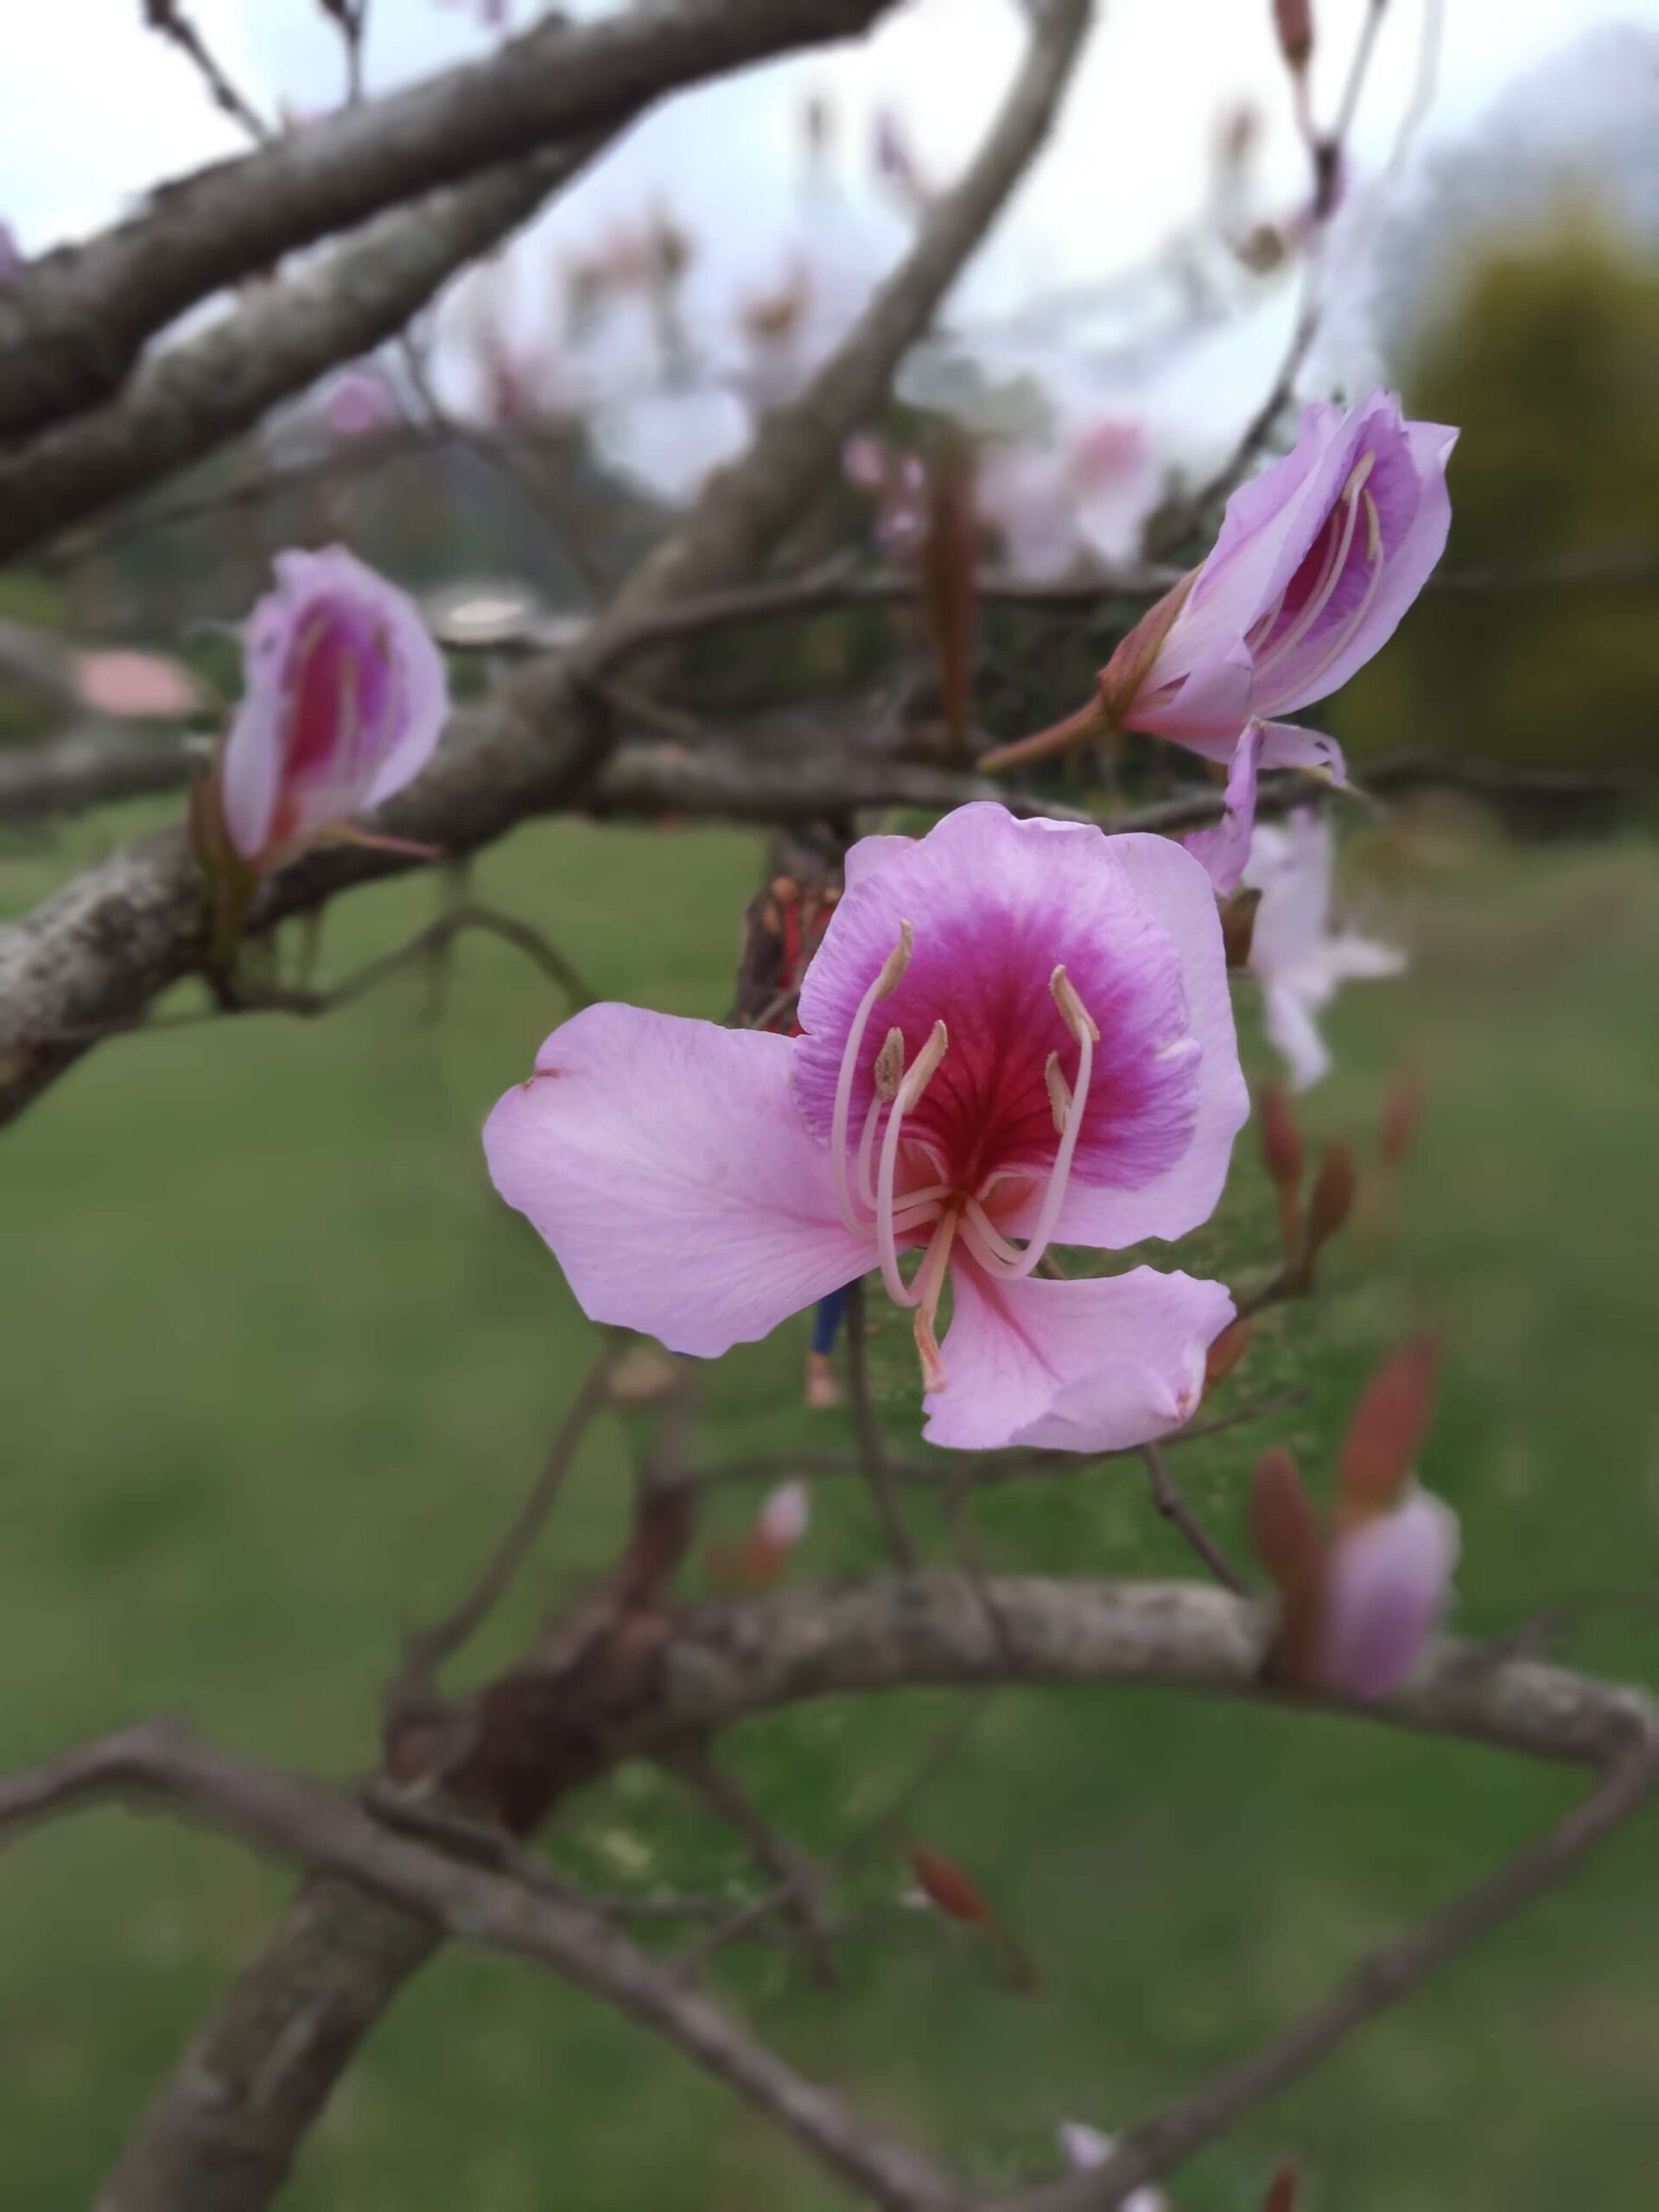 gionee s11 lite review portrait mode sample